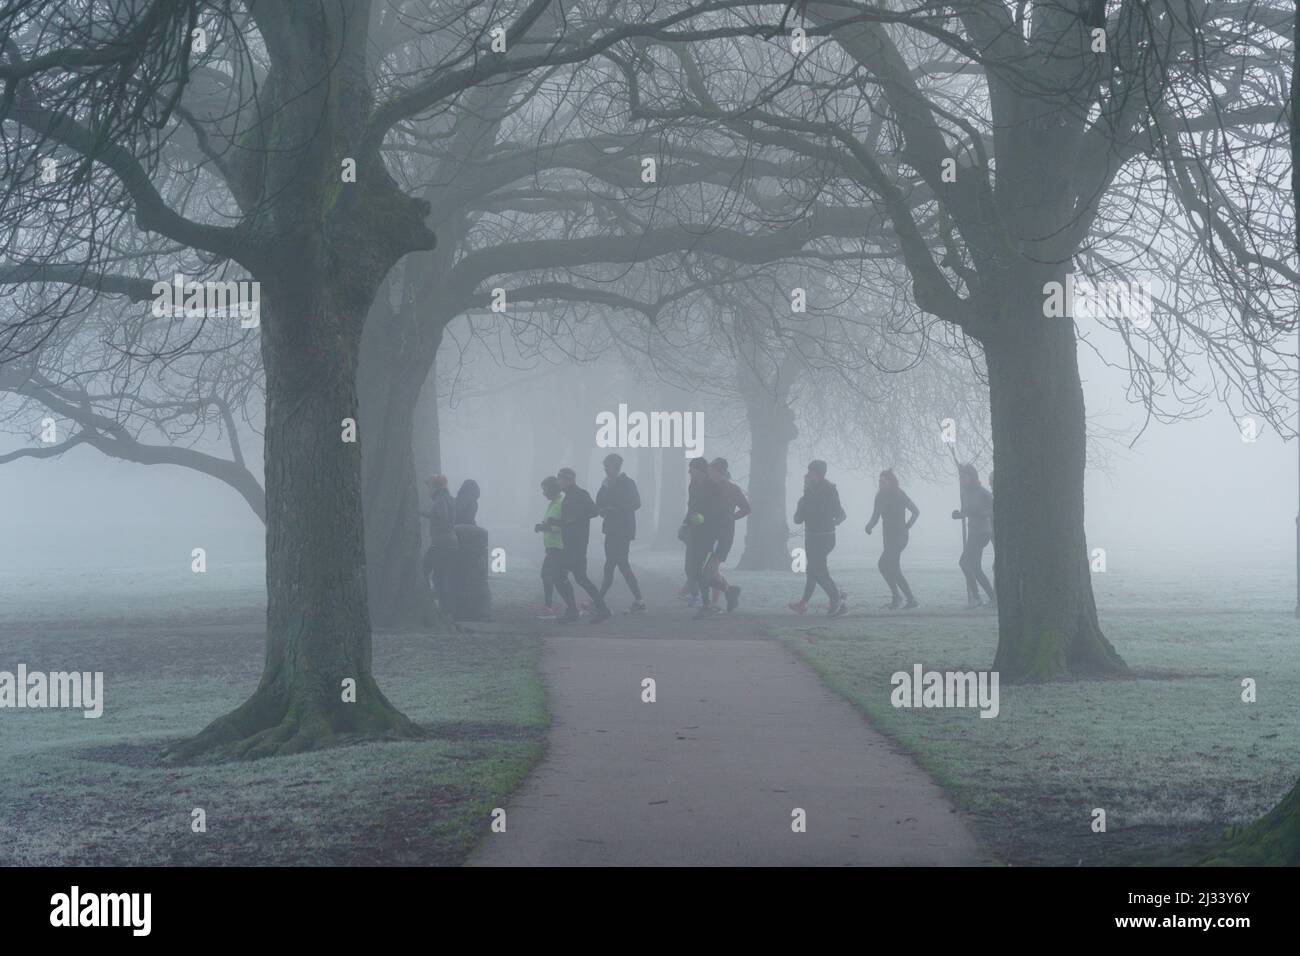 On a cold morning in Harrogate, England, a diverse group of joggers brave the misty weather to take a run along The Stray, England, UK. Stock Photo